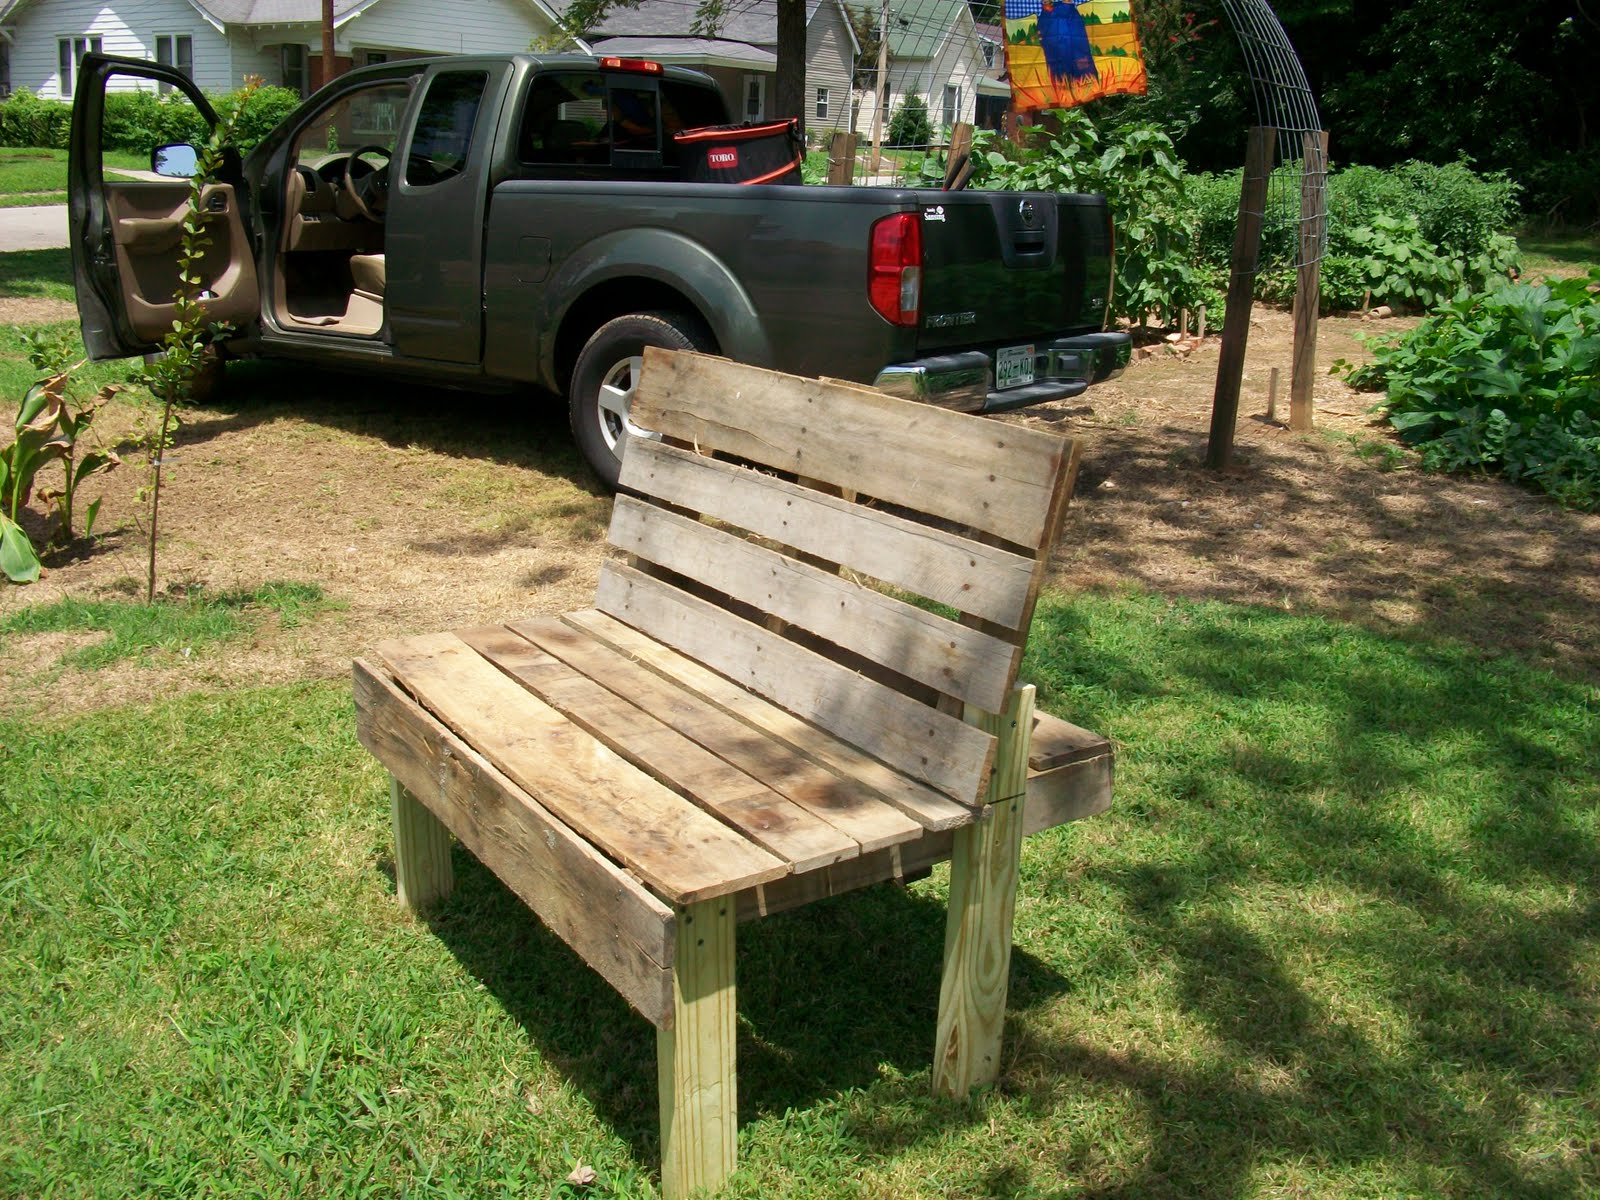 garden daddy: recycled pallet becomes garden bench